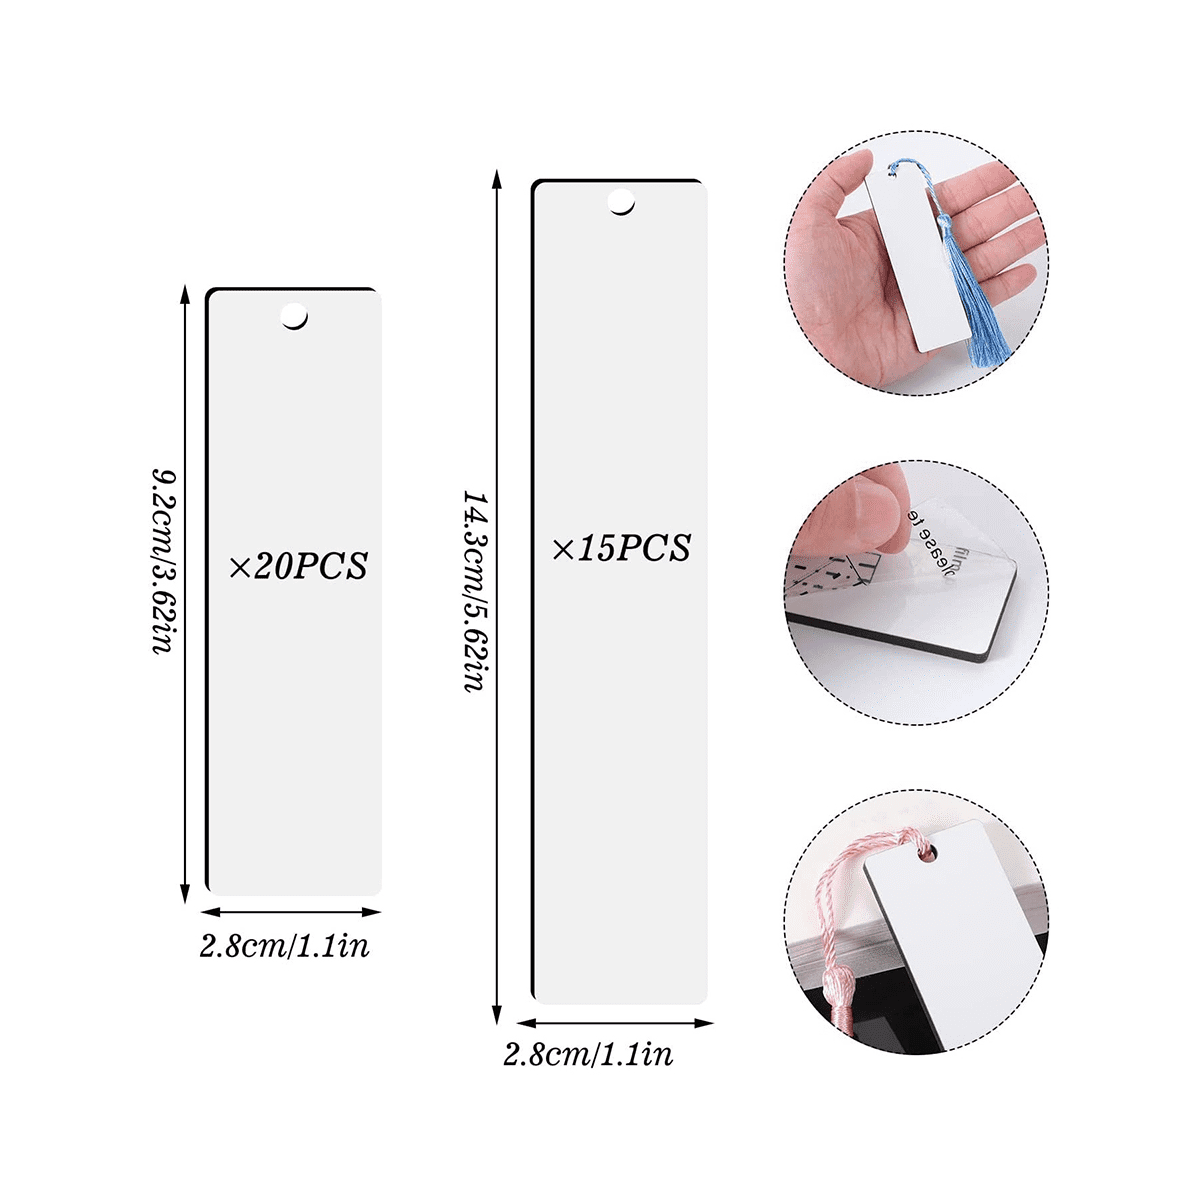 Blank Bookmarks to Decorate – Paper Card DIY Crafts Plain White Bookmarks  with Hole for String or Tassel, 100 Pack – BigaMart